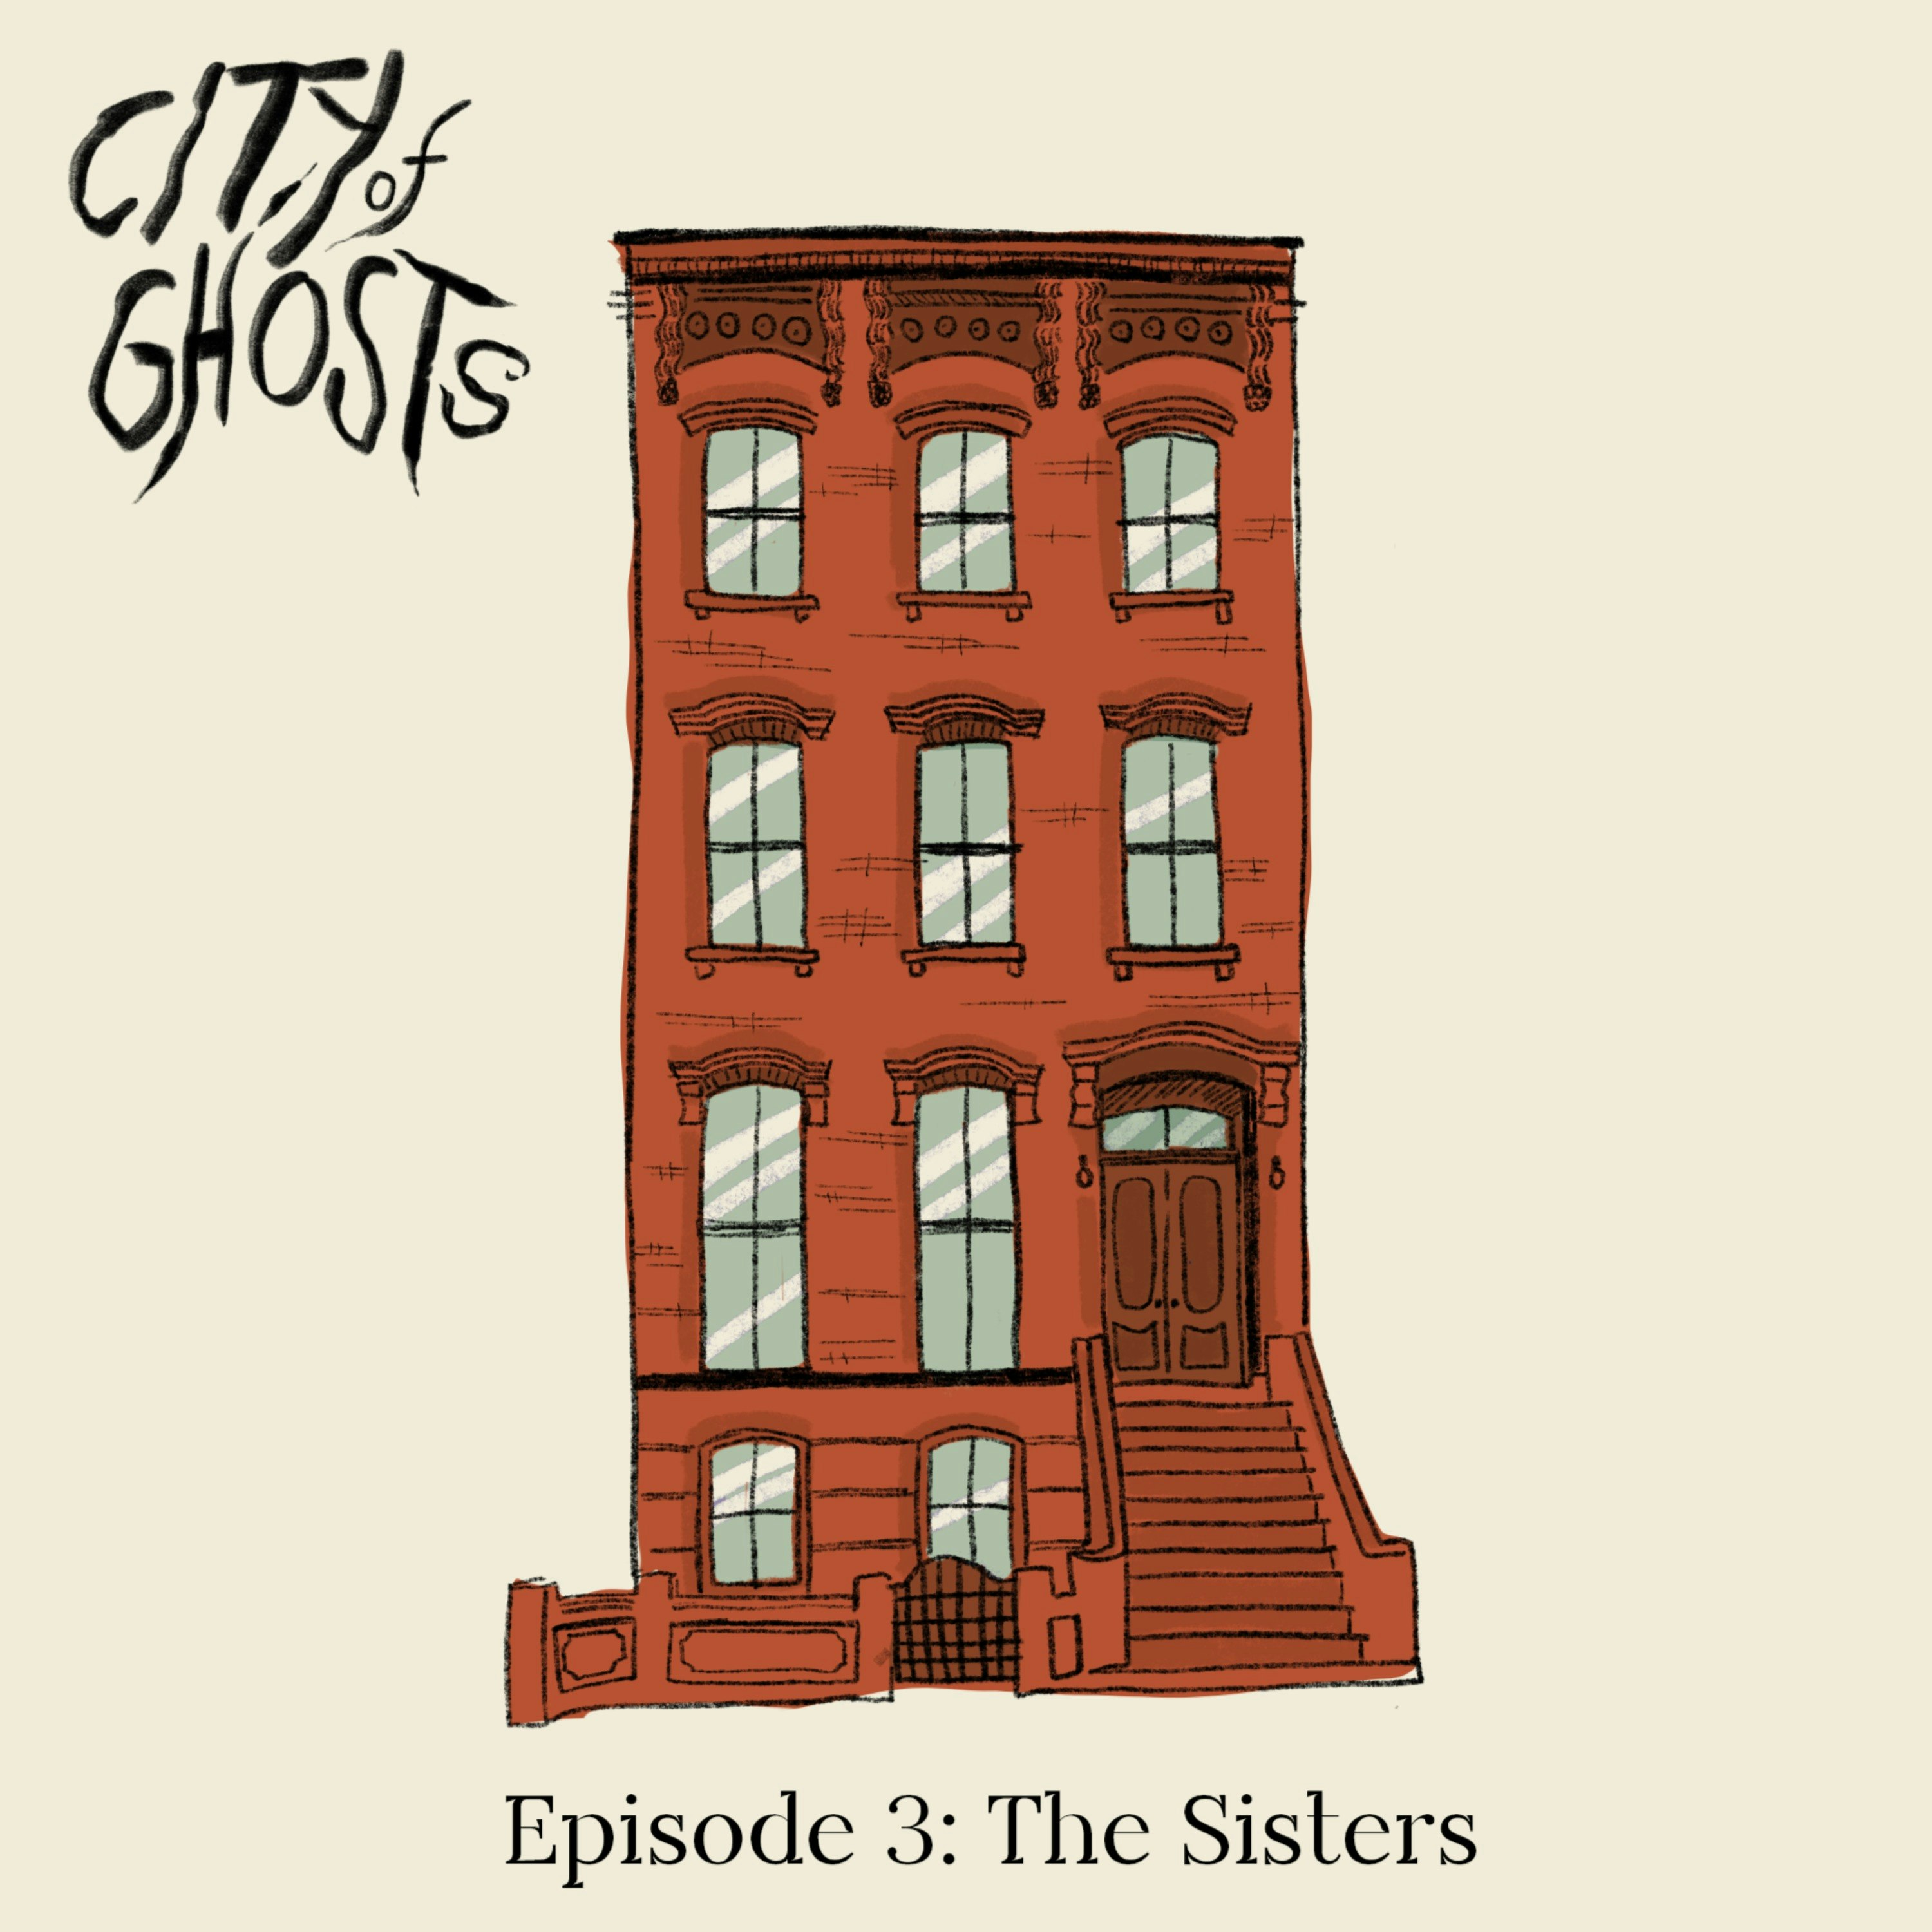 Episode 3: The Sisters